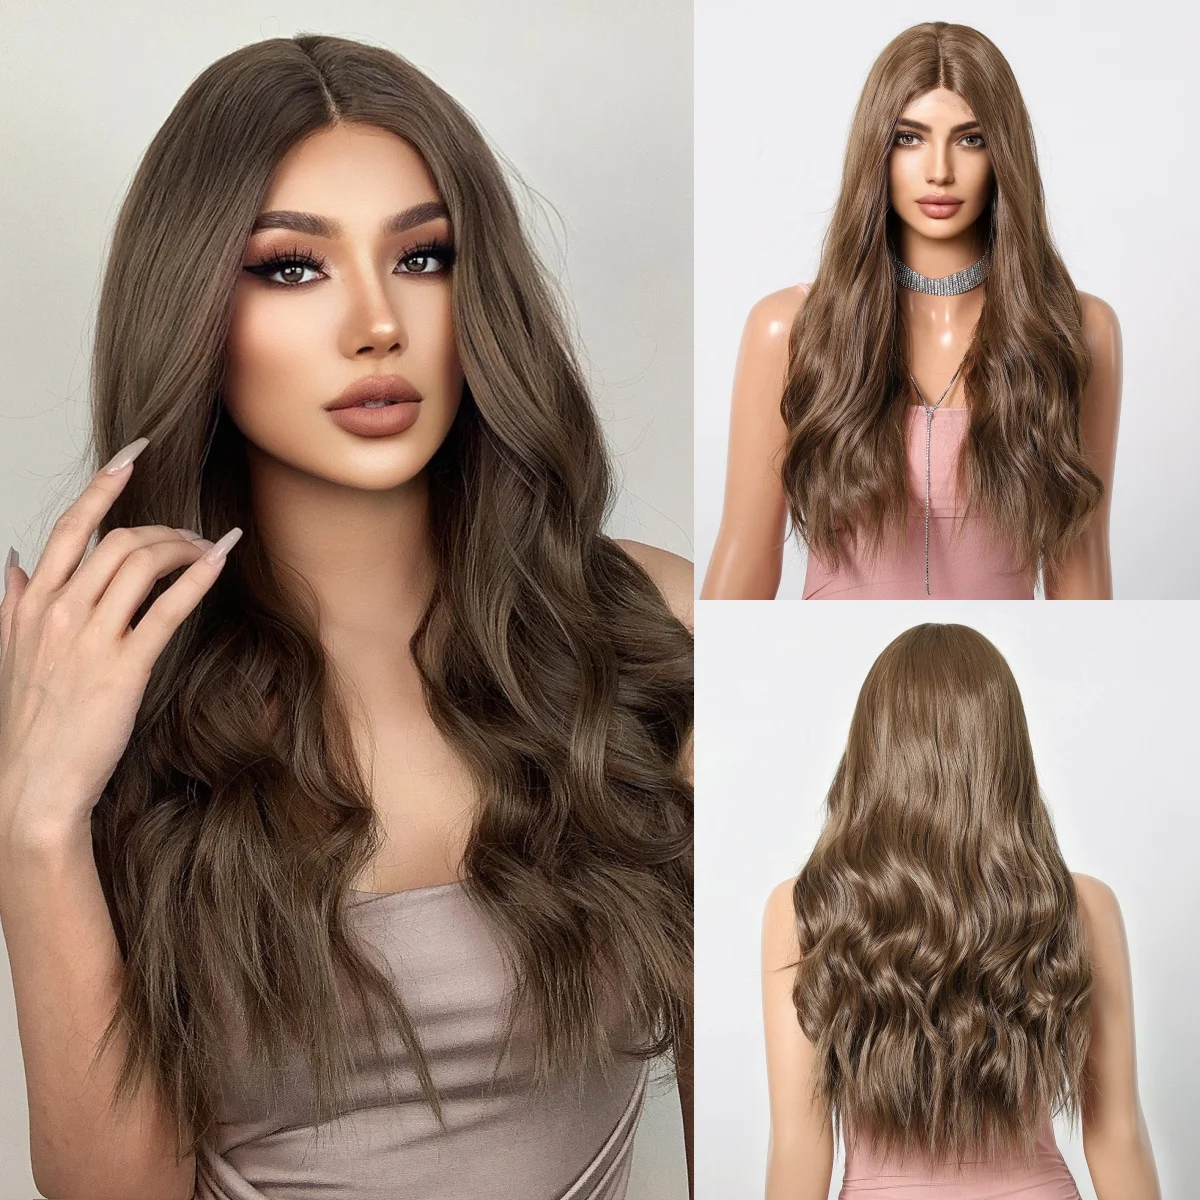 

HAIRCUBE Lace Synthetic Wigs Long Wavy Brown Lace Front Wigs for Women Natural Middle Part Cosplay Daily Heat Resistant Fiber